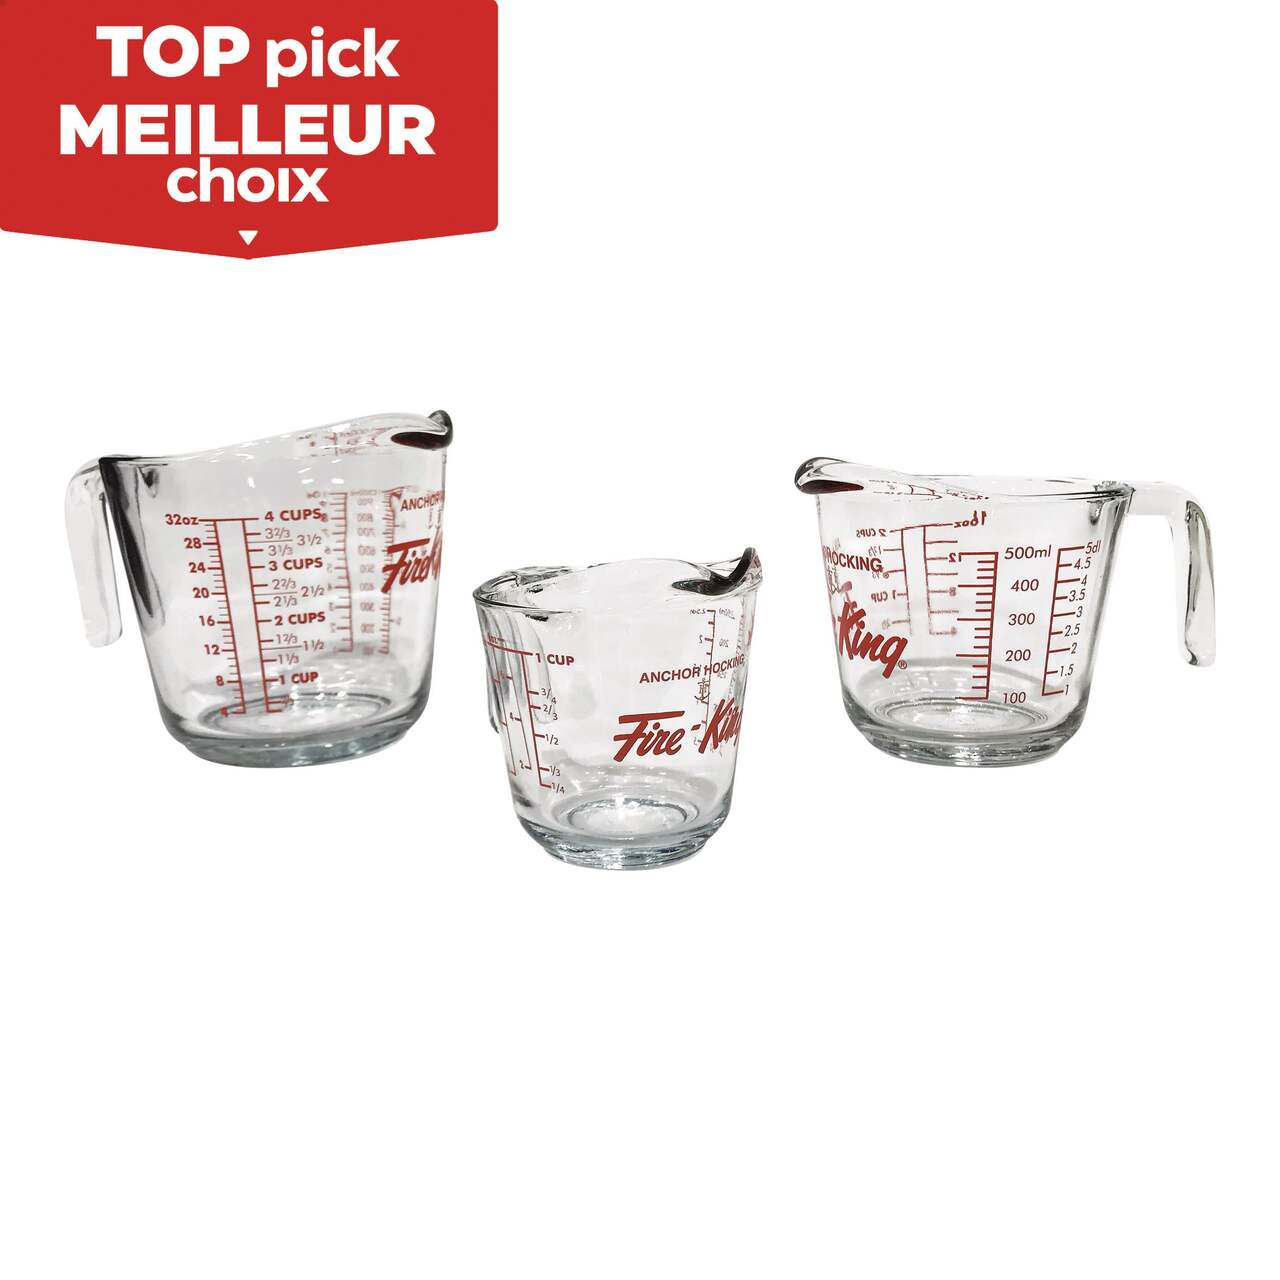 https://media-www.canadiantire.ca/product/living/kitchen/bakeware-baking-prep/0421133/anchor-value-pack-3-piece-measuring-cup-set-96db974a-af03-4681-a0db-404bf7969abc-jpgrendition.jpg?imdensity=1&imwidth=640&impolicy=mZoom